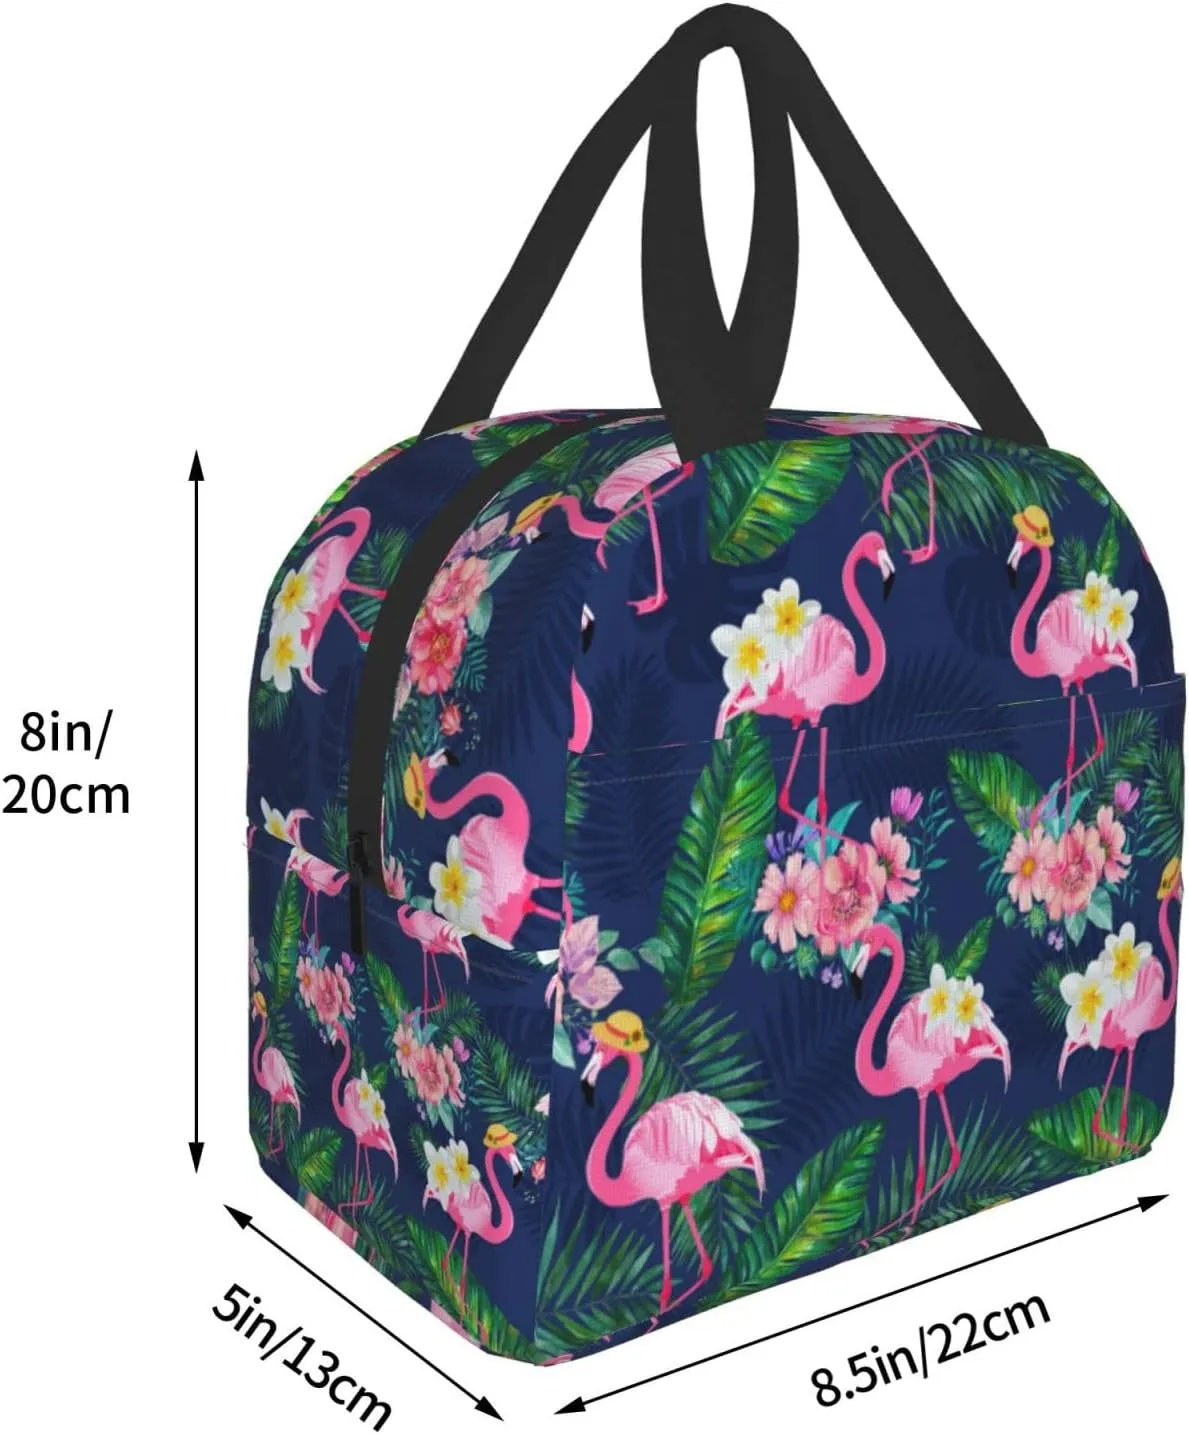 Portable Lunch Bag Flamingos Insulated Lunch Box Reusable Cooler Tote Bag with Front Pocket for Women Men Work Picnic Travel